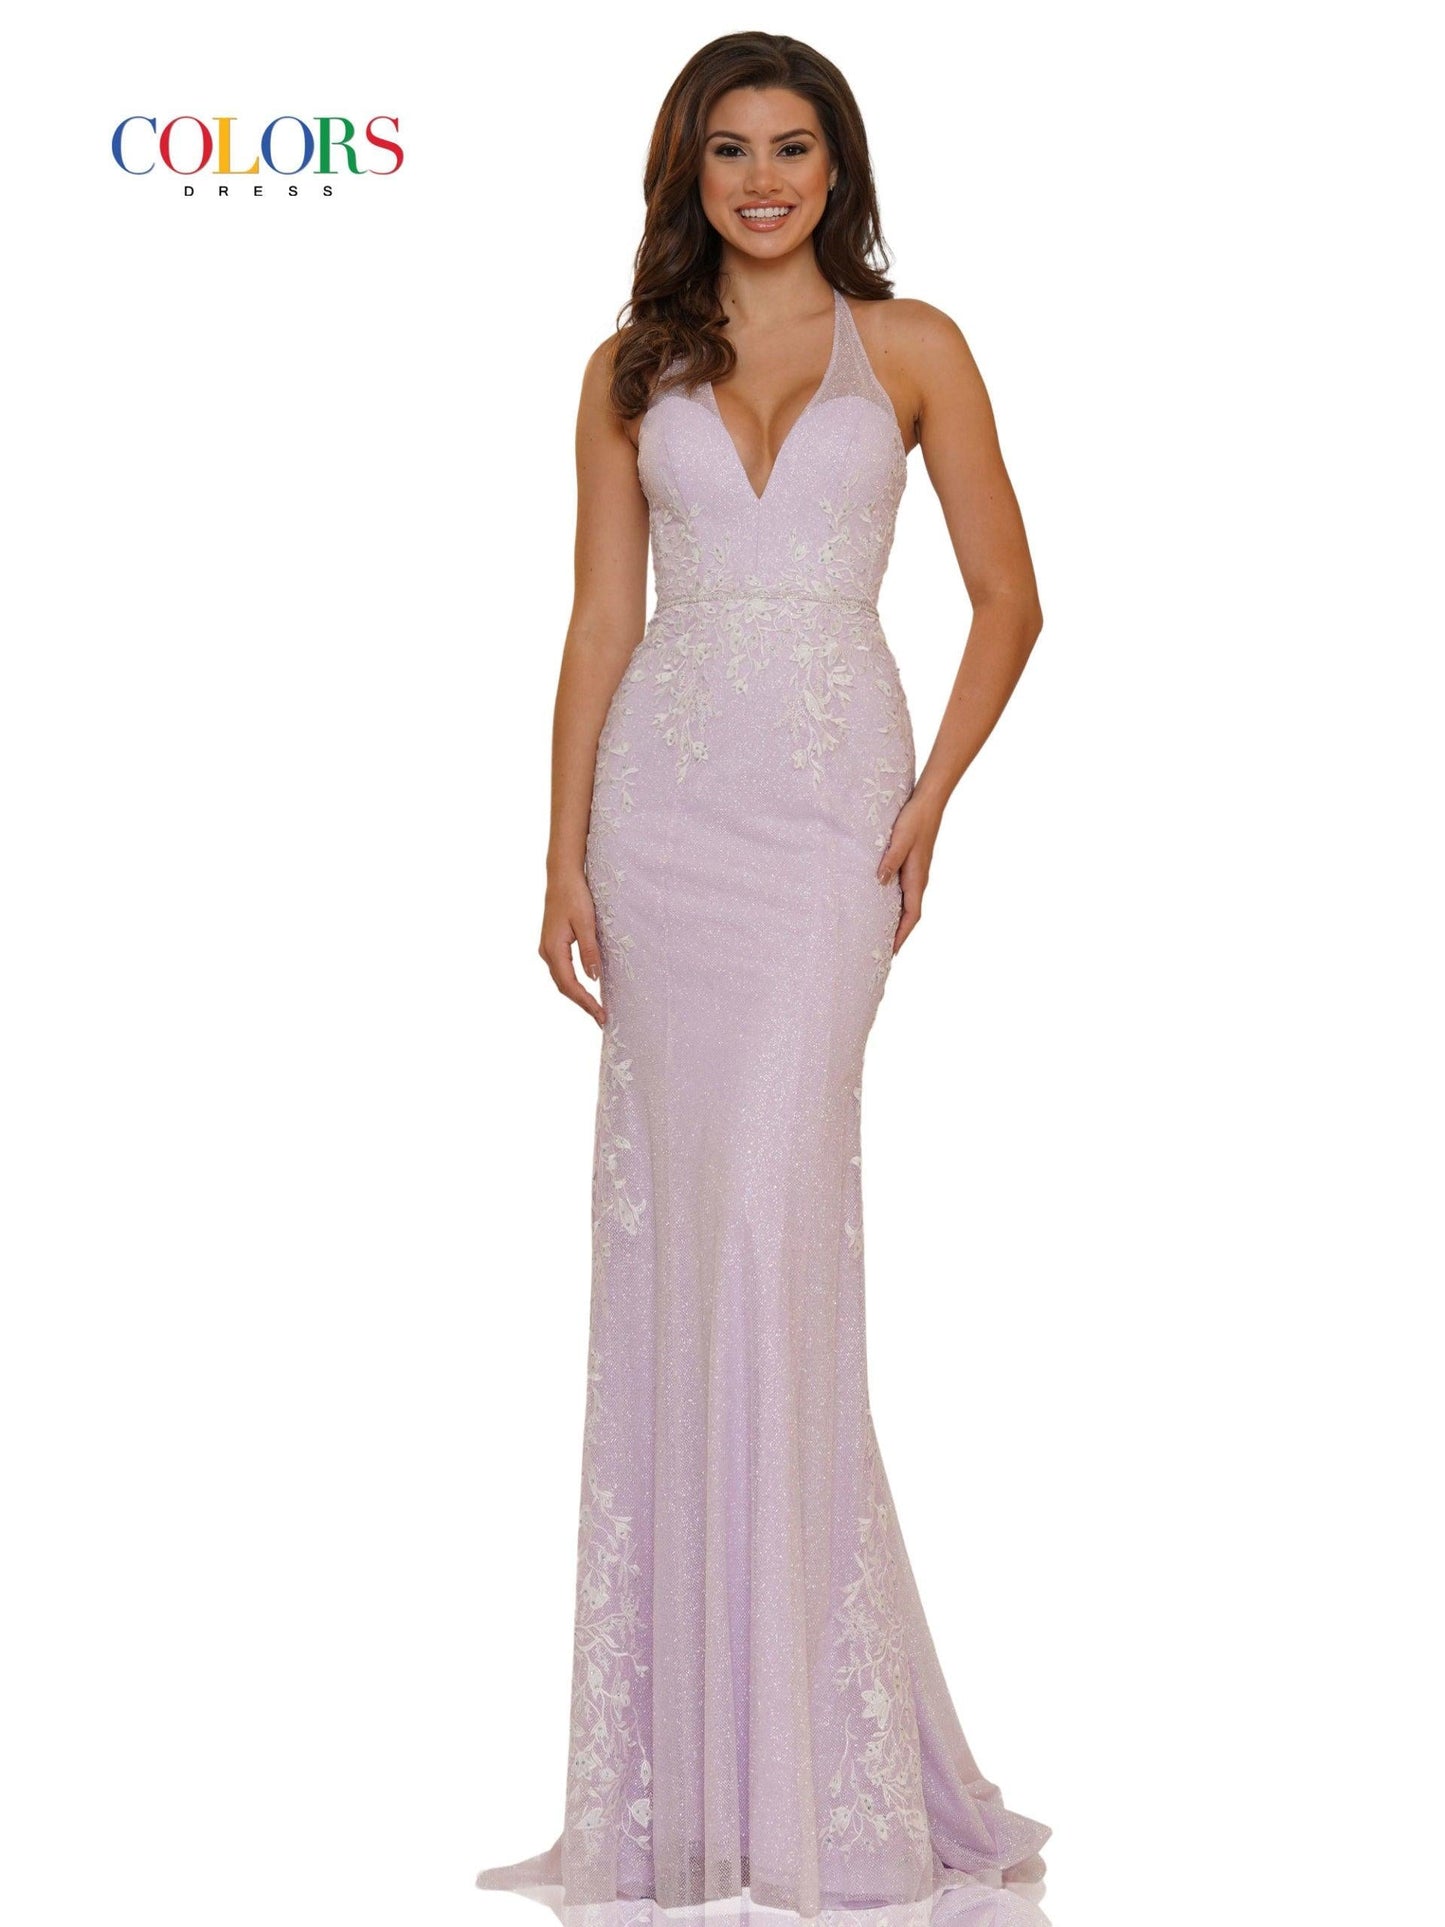 Colors Long Formal Halter Fitted Prom Dress 2686 - The Dress Outlet